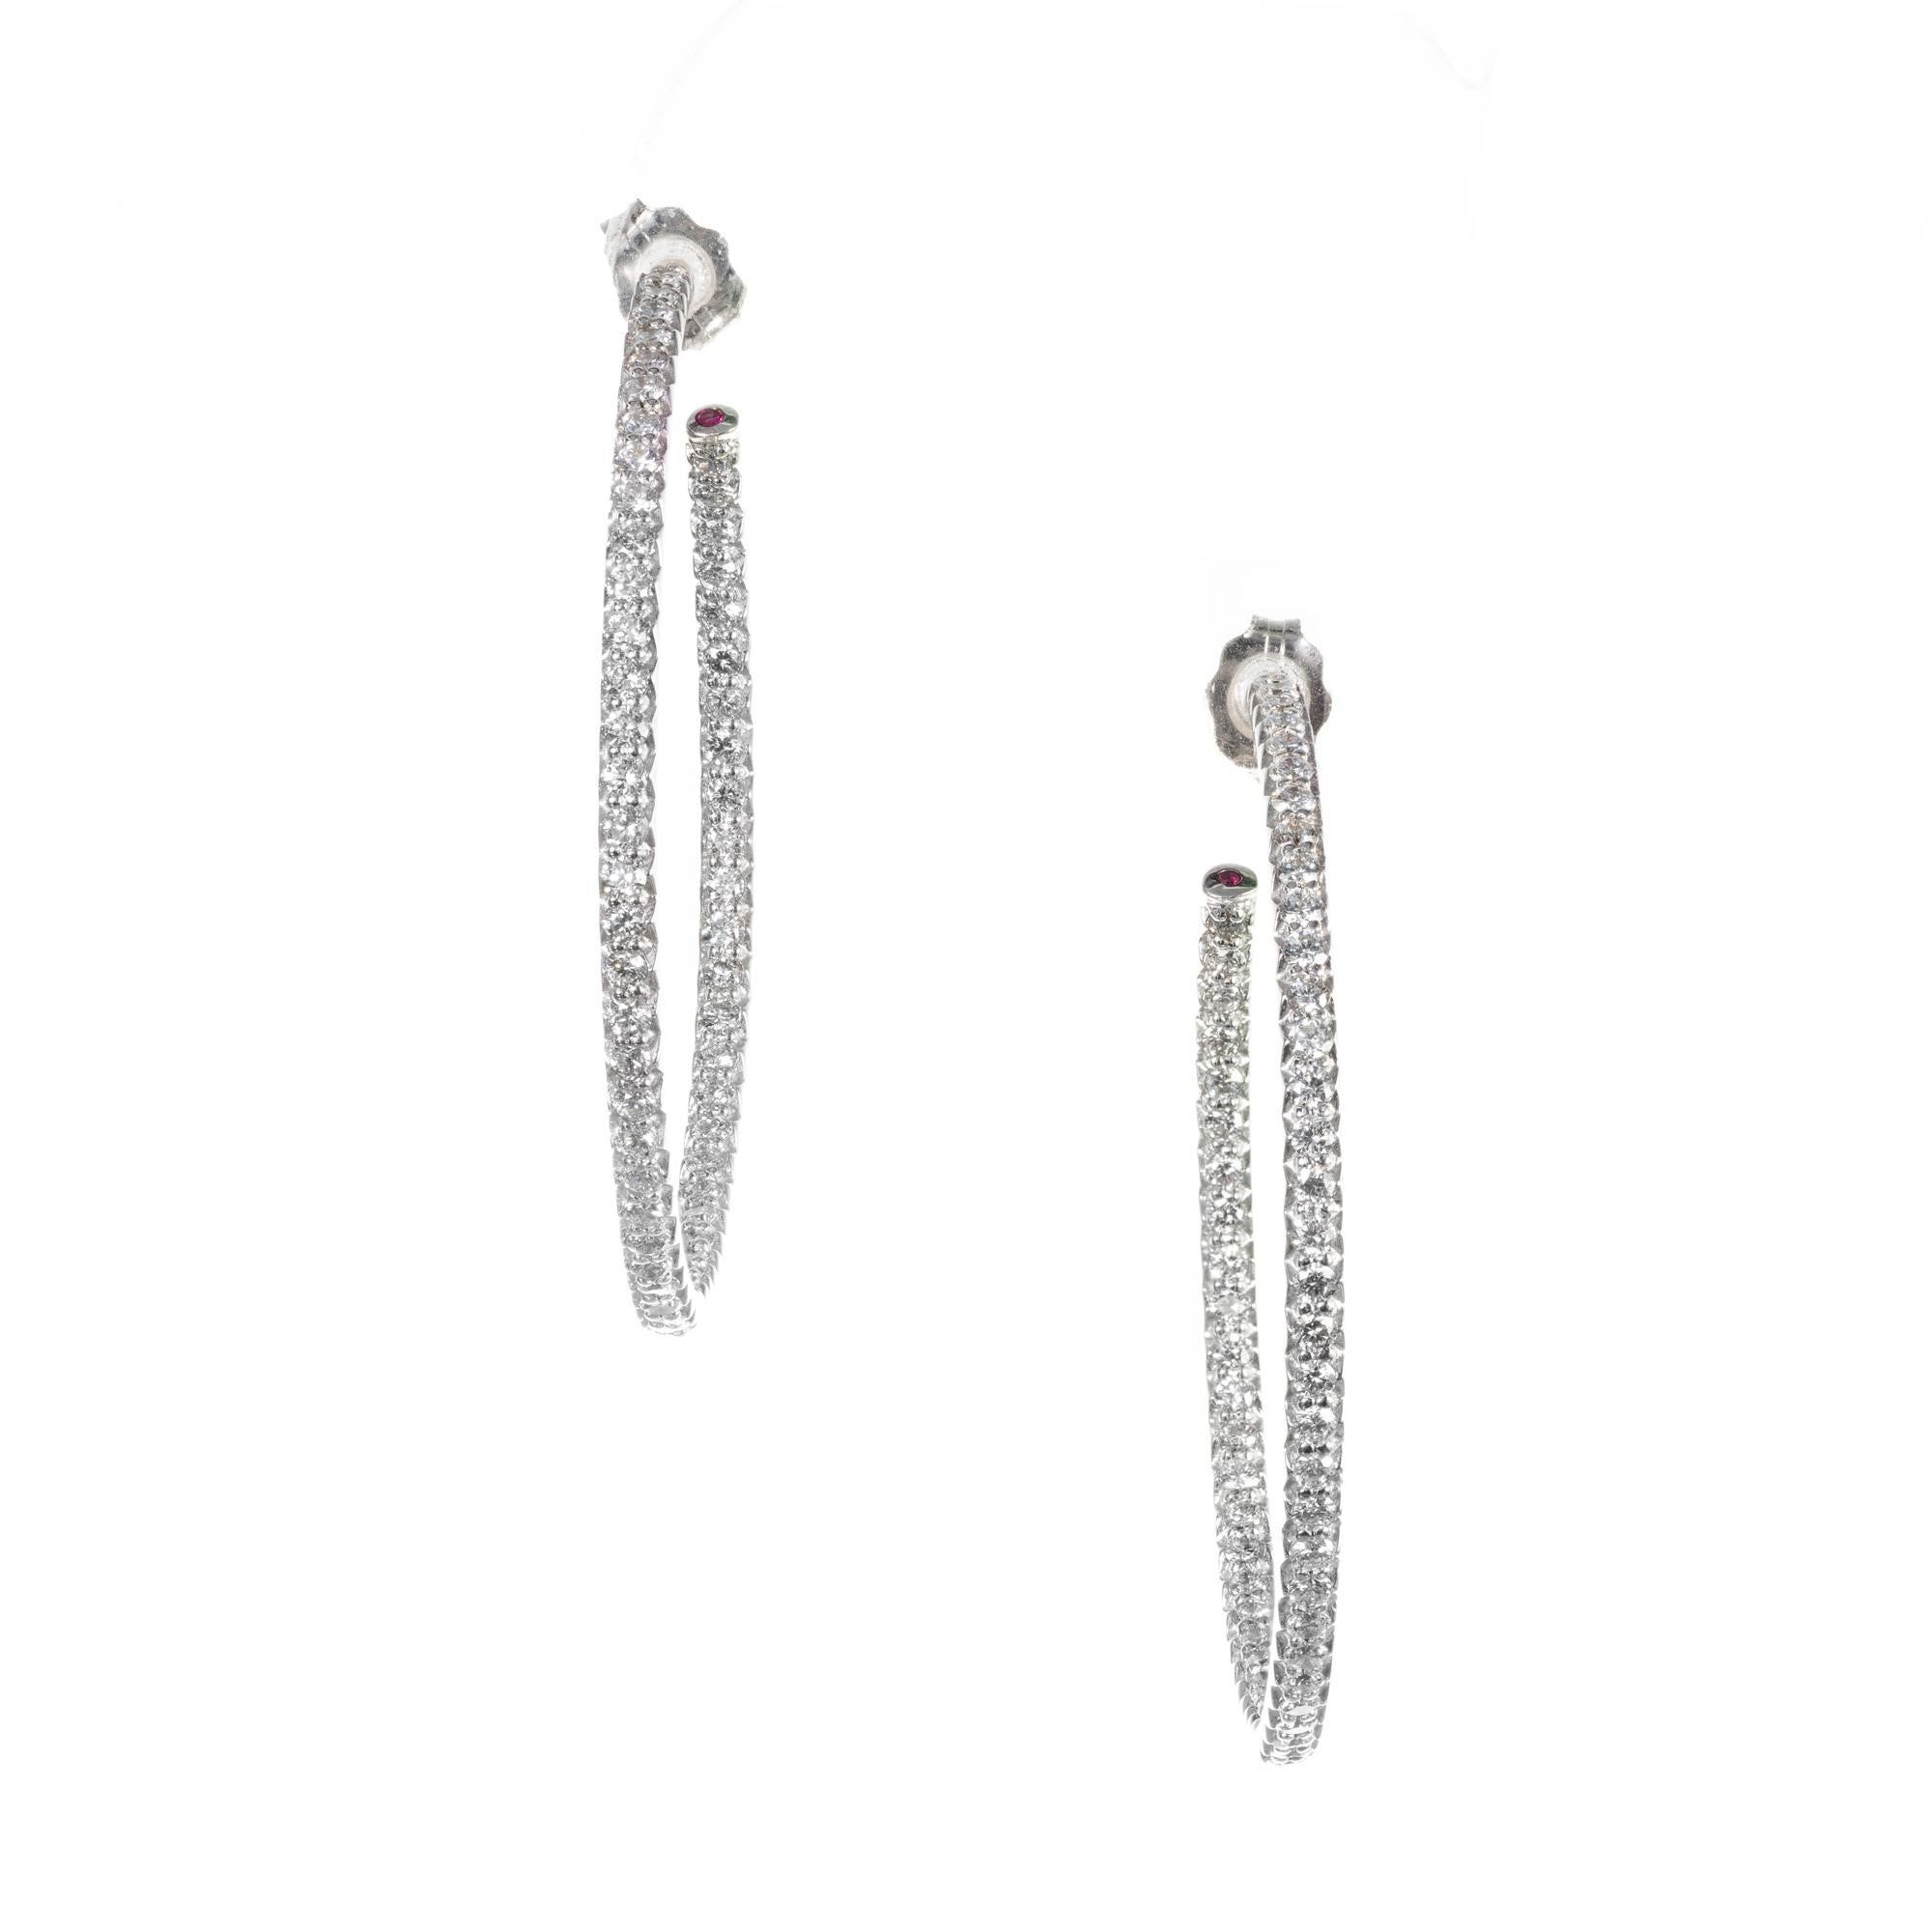 Roberto Coin Diamond Inside Outside hoop style earrings.  one ruby at the end of each hoop. 

112 round brilliant cut H-I VS-SI diamonds, Approximate 1.50ct 
2 round rubies, Approximate .01cts
18k white gold 
Stamped: 18k
6.4 grams
Top to bottom: